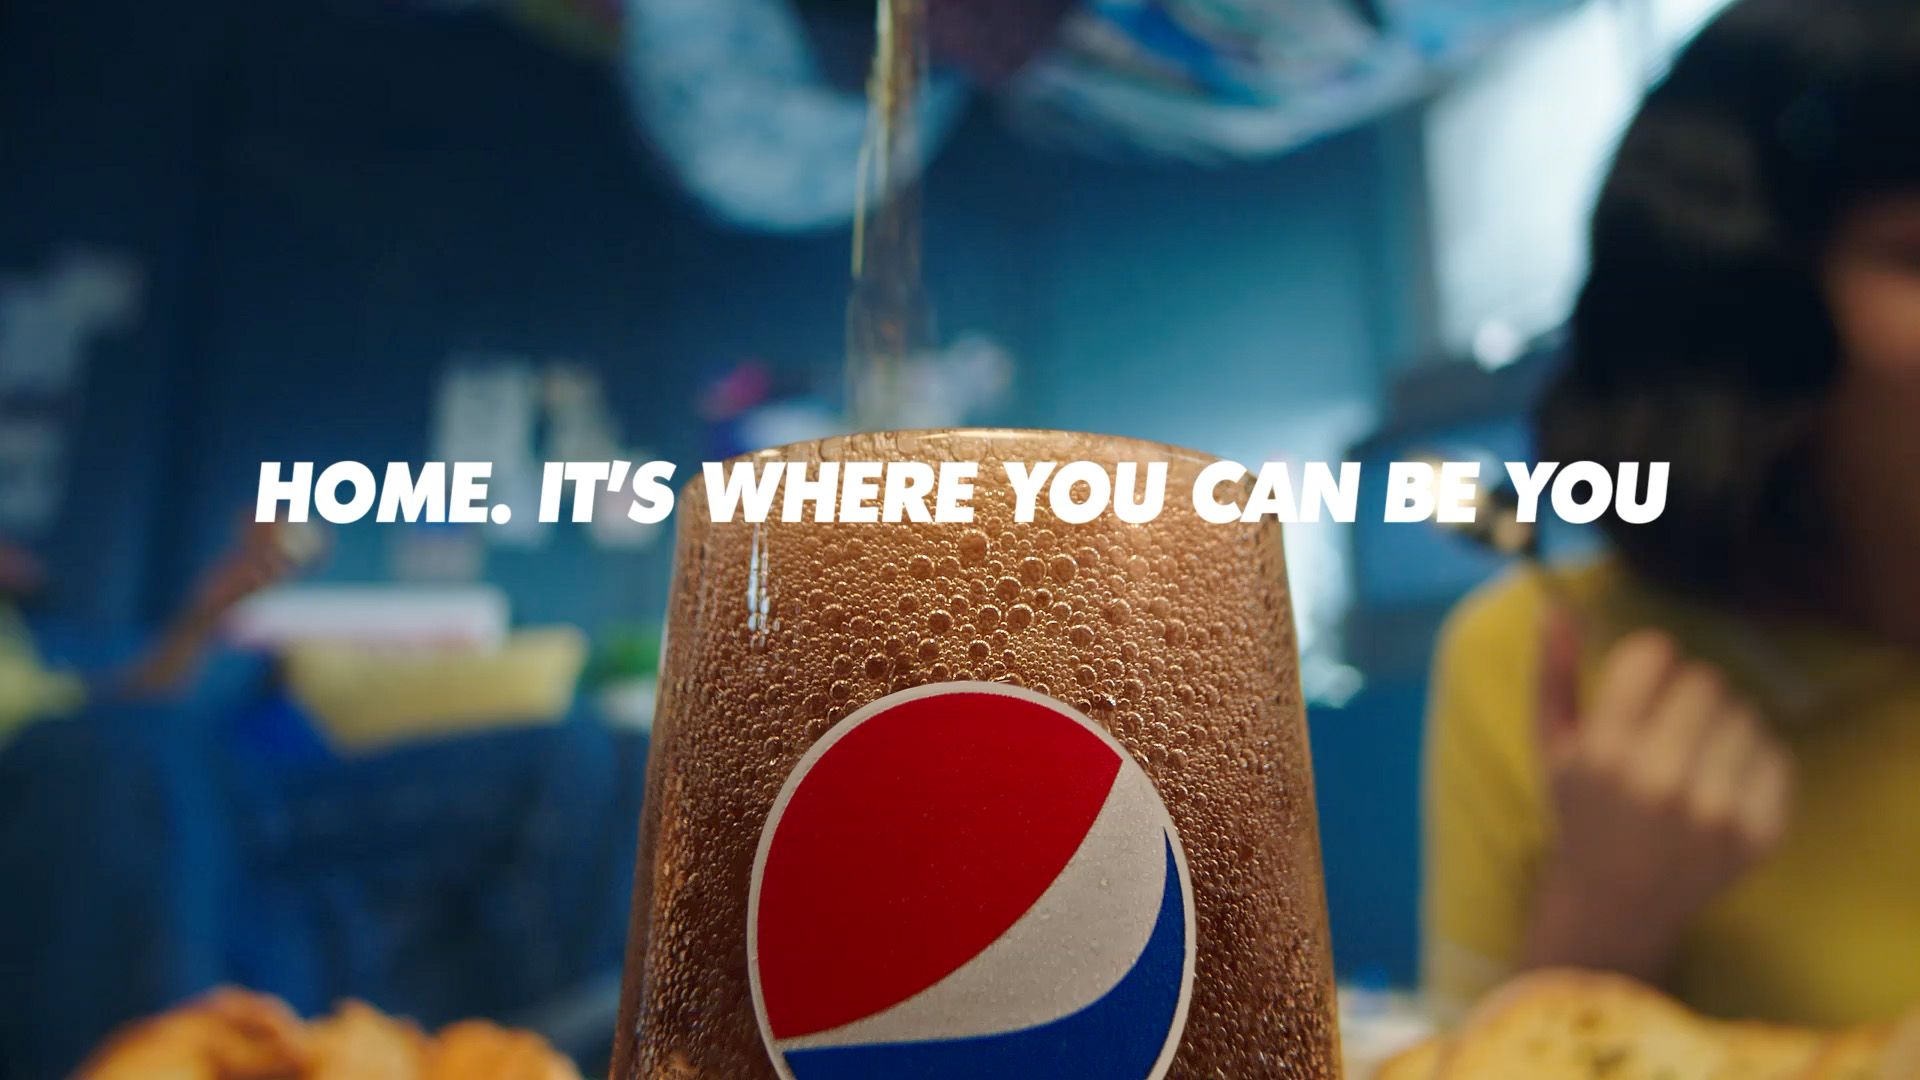 Pepsi_This-is-a-pepsi-home-15